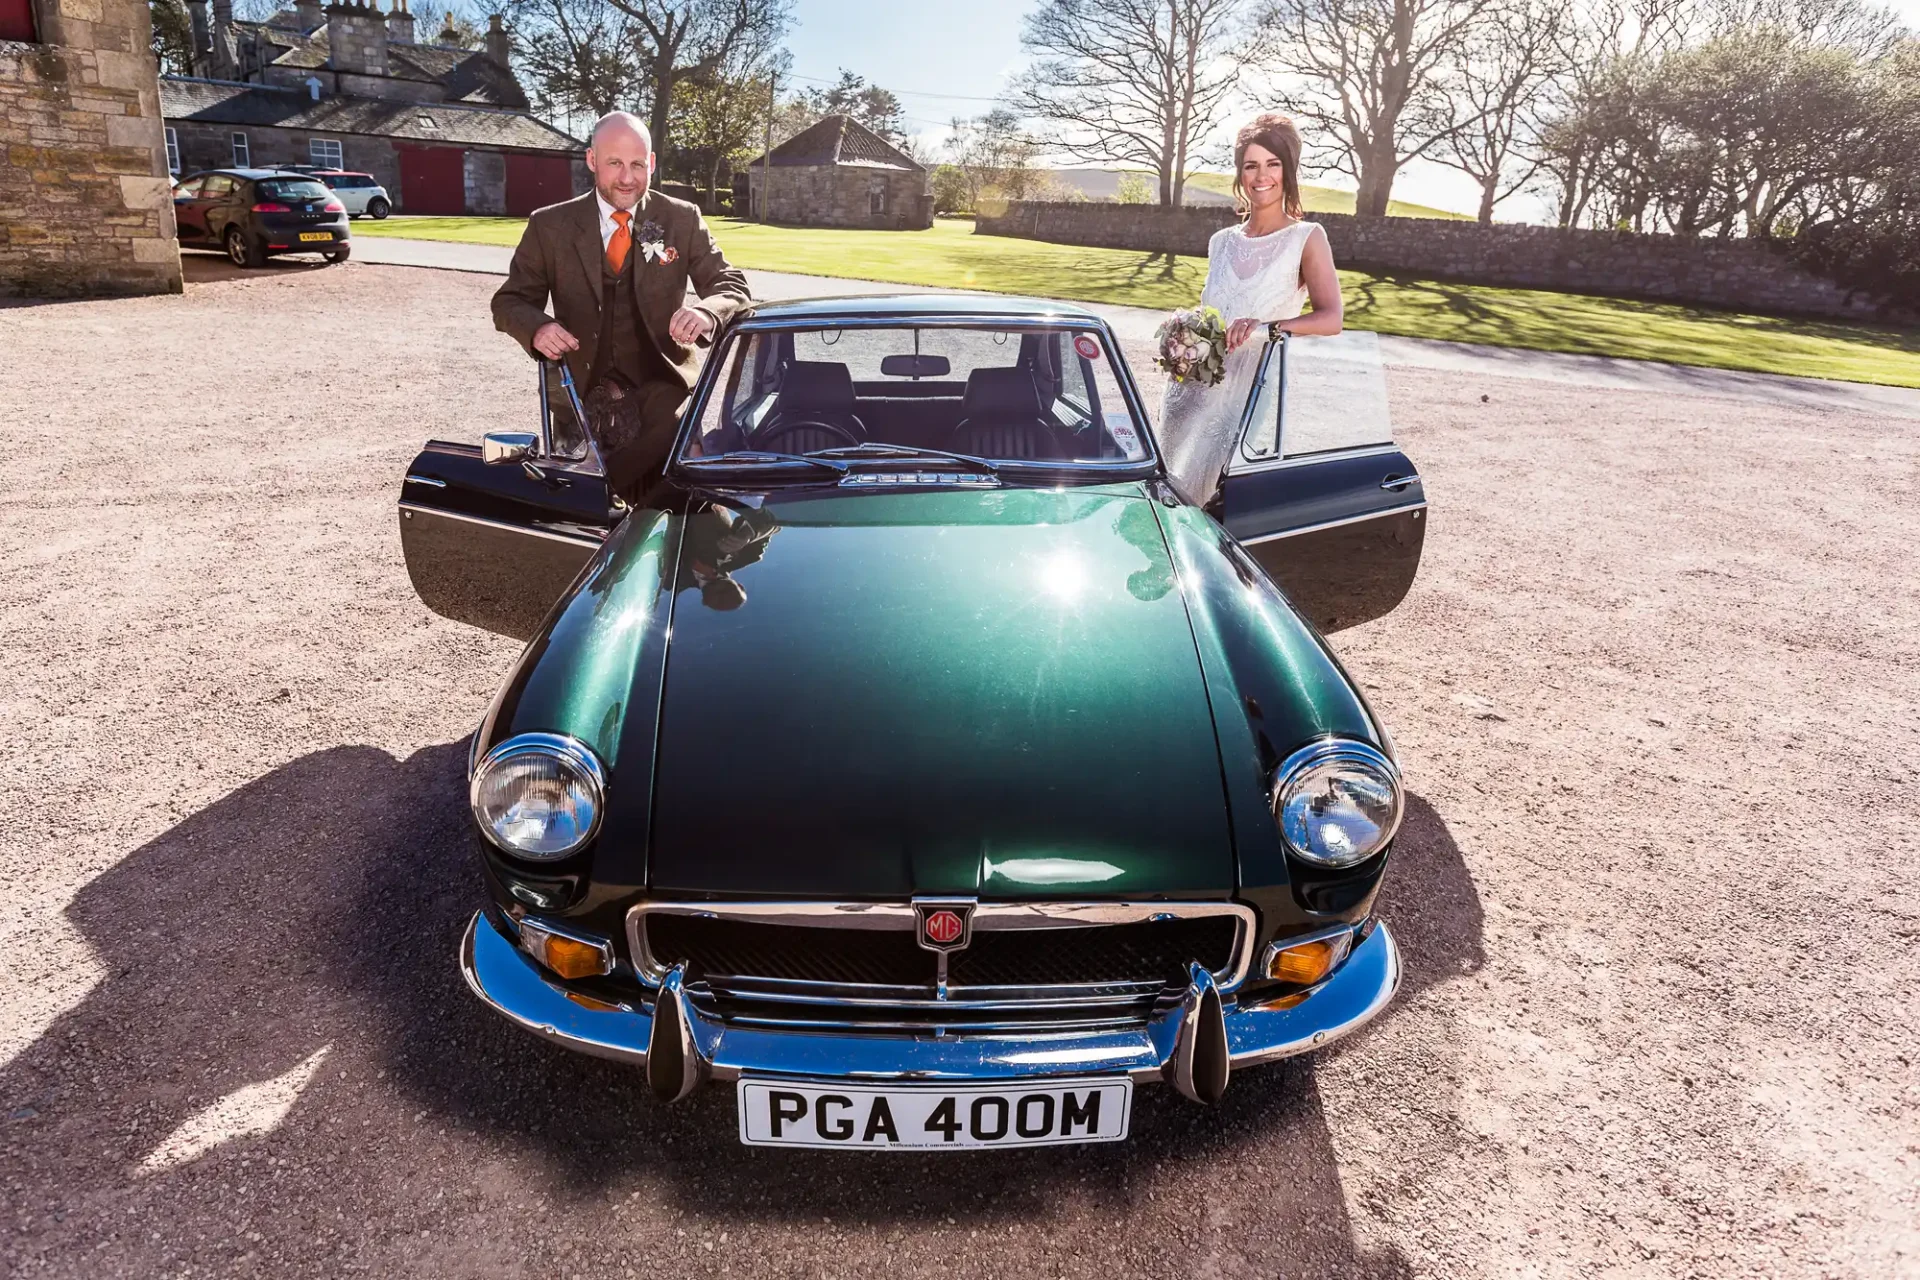 A bride and groom standing by a green vintage car with open doors on a sunny day.